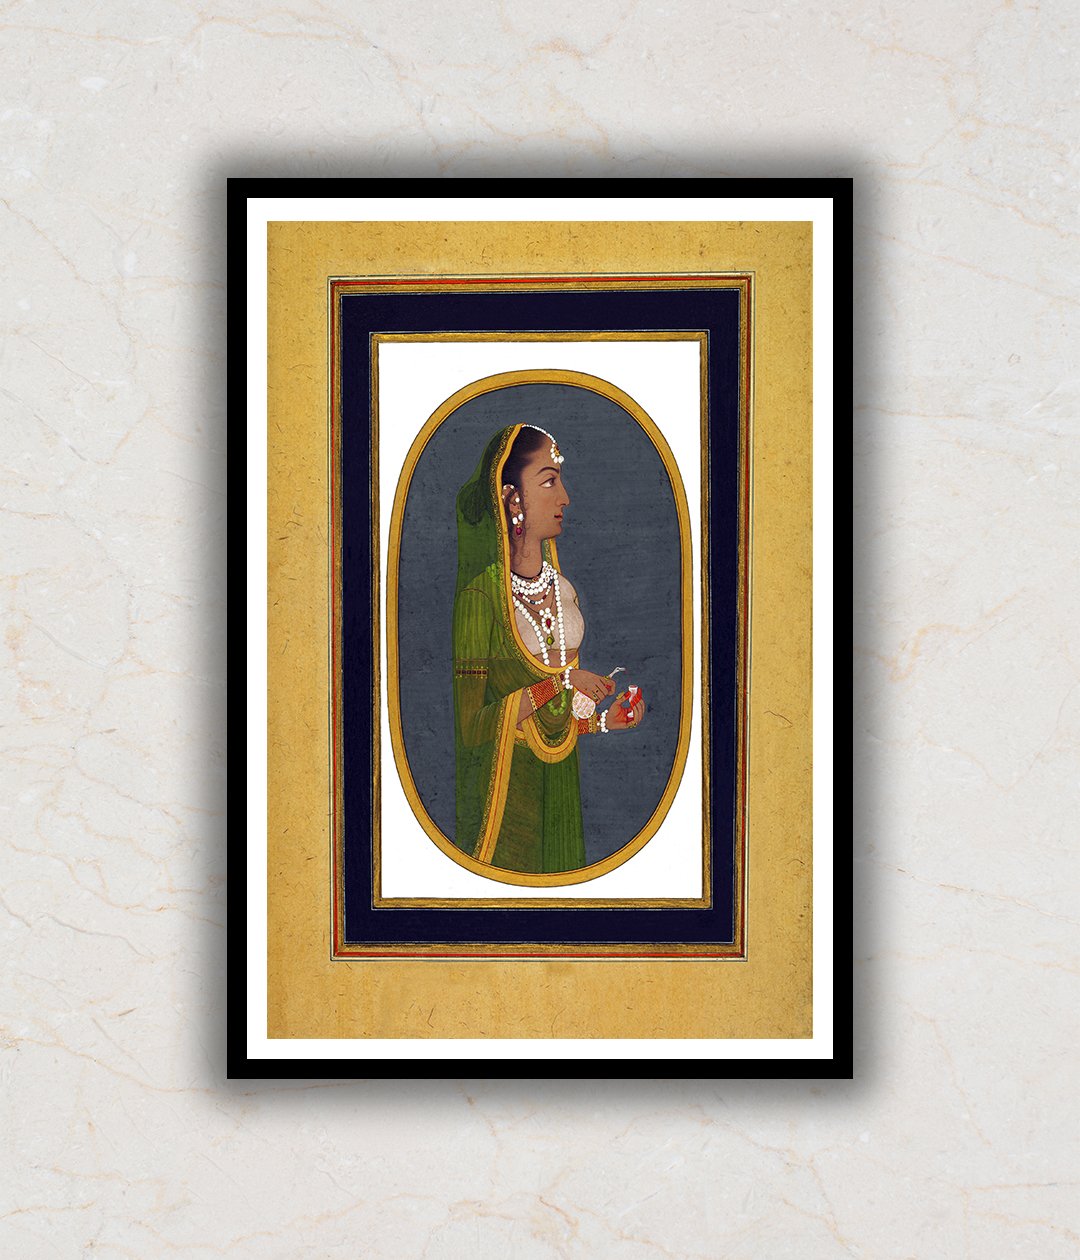 An Amicable Hostess Rajasthani Portrait Art Painting For Home Wall Art Decor